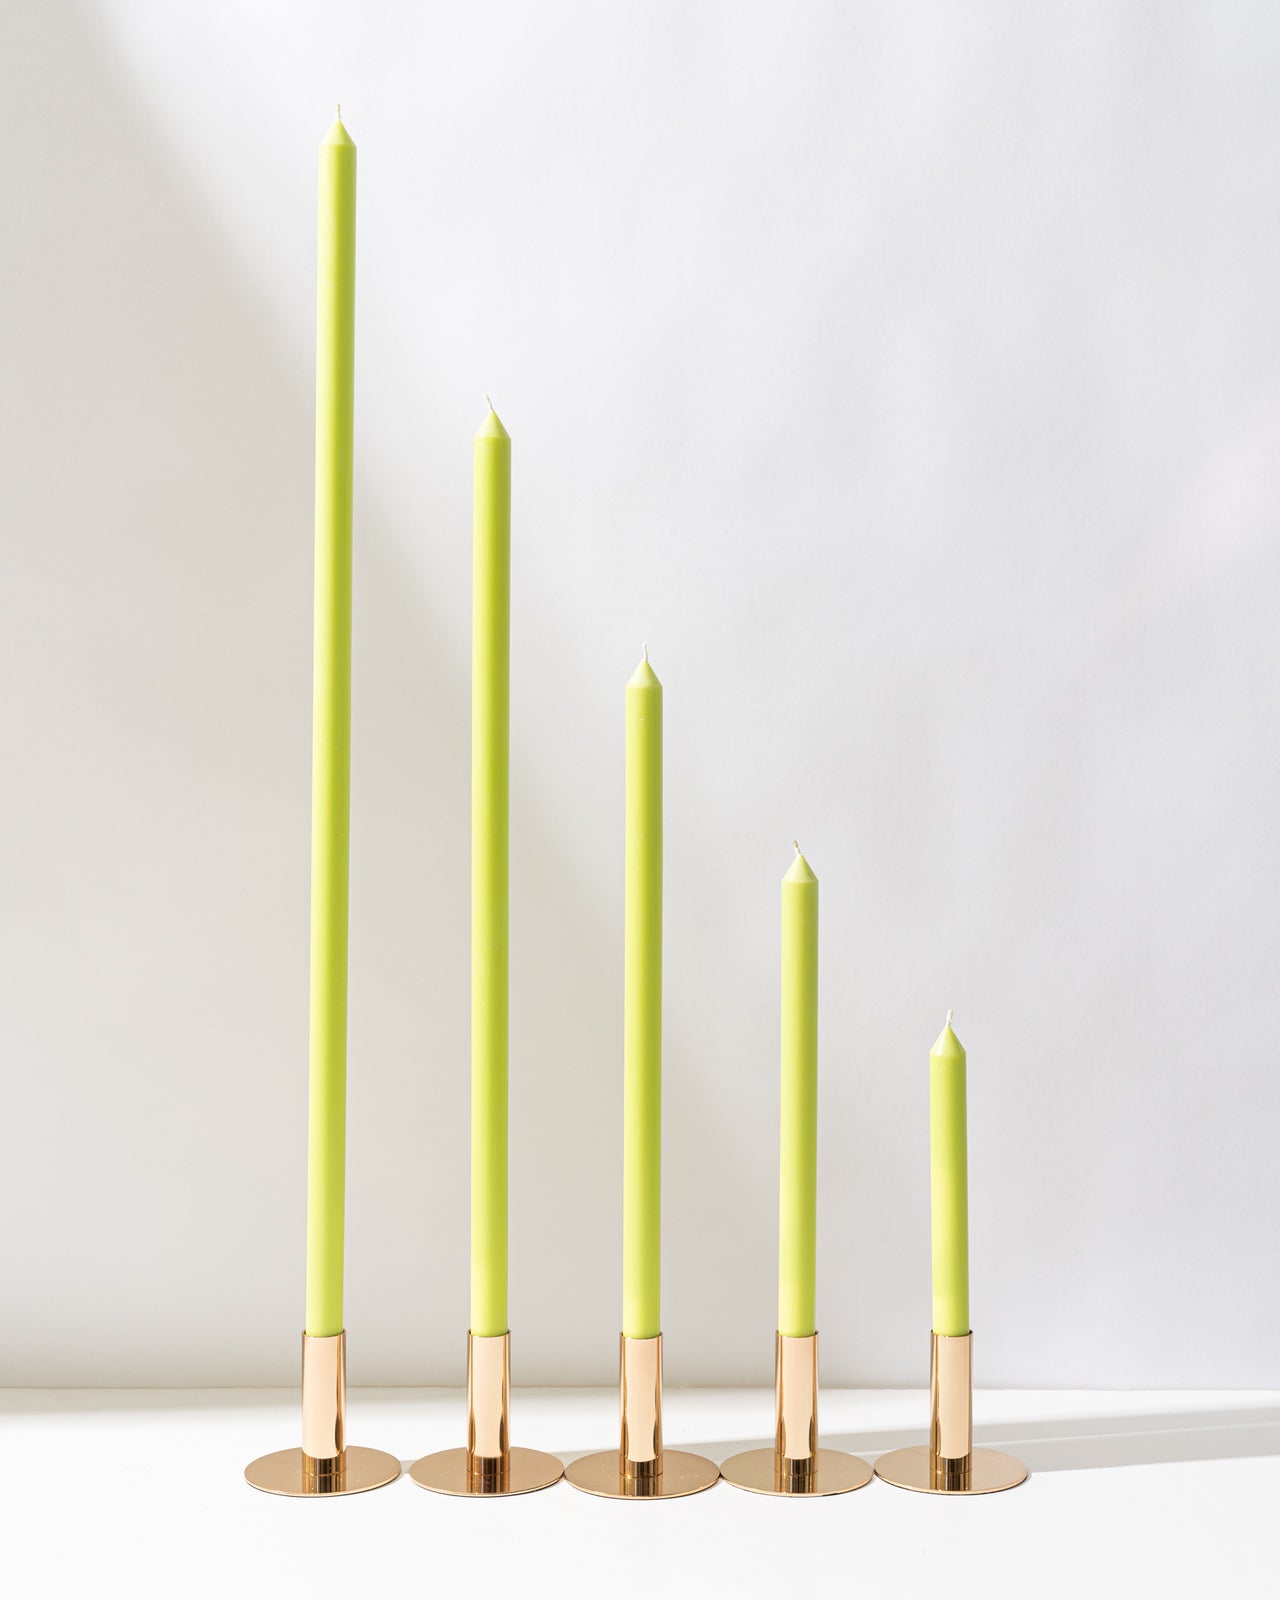 APPLE | XXL Cathedral Candles